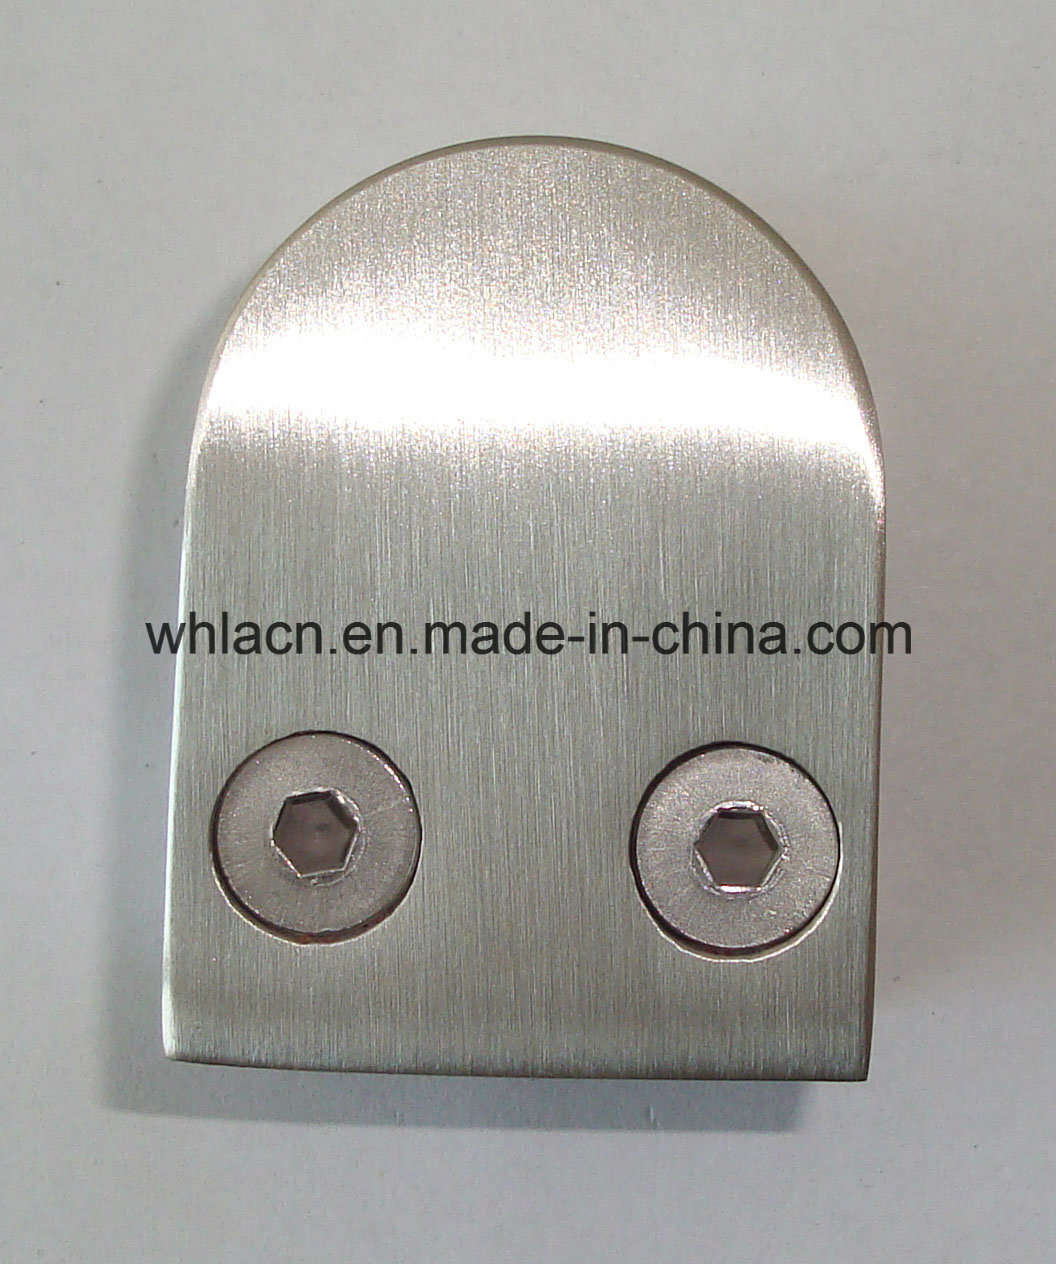 Stainless Steel Glass Stair Railing Clamp for Building Hardware (D type)